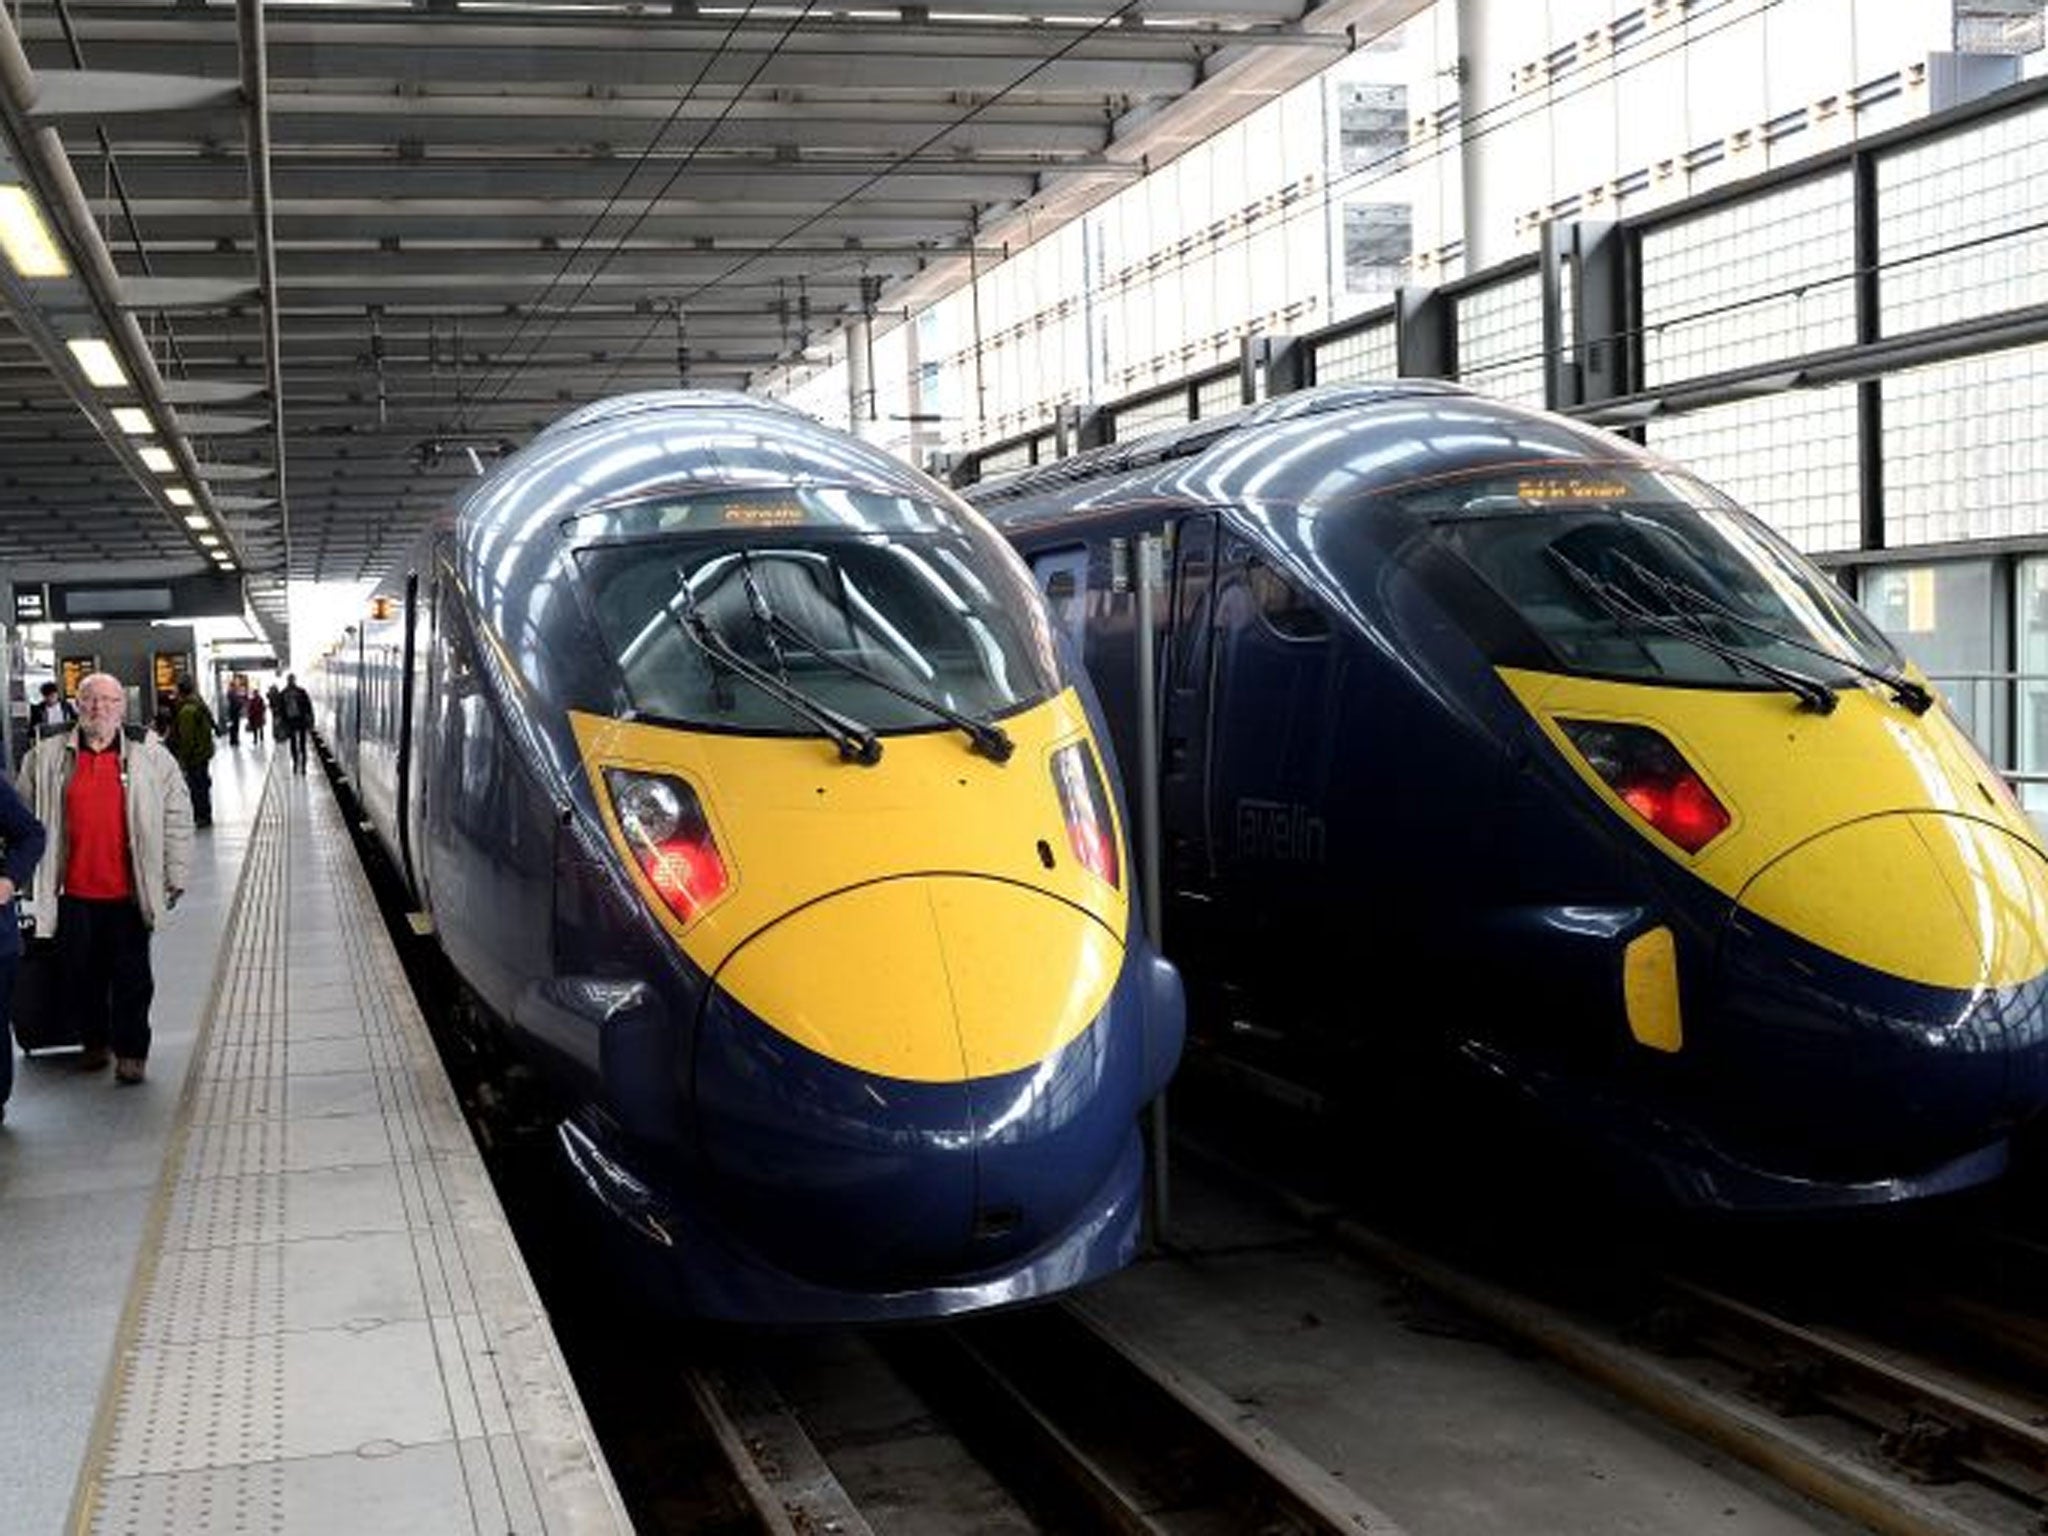 Hitachi's High Speed trains at St.Pancras International station in London, Britain 20 March 2014